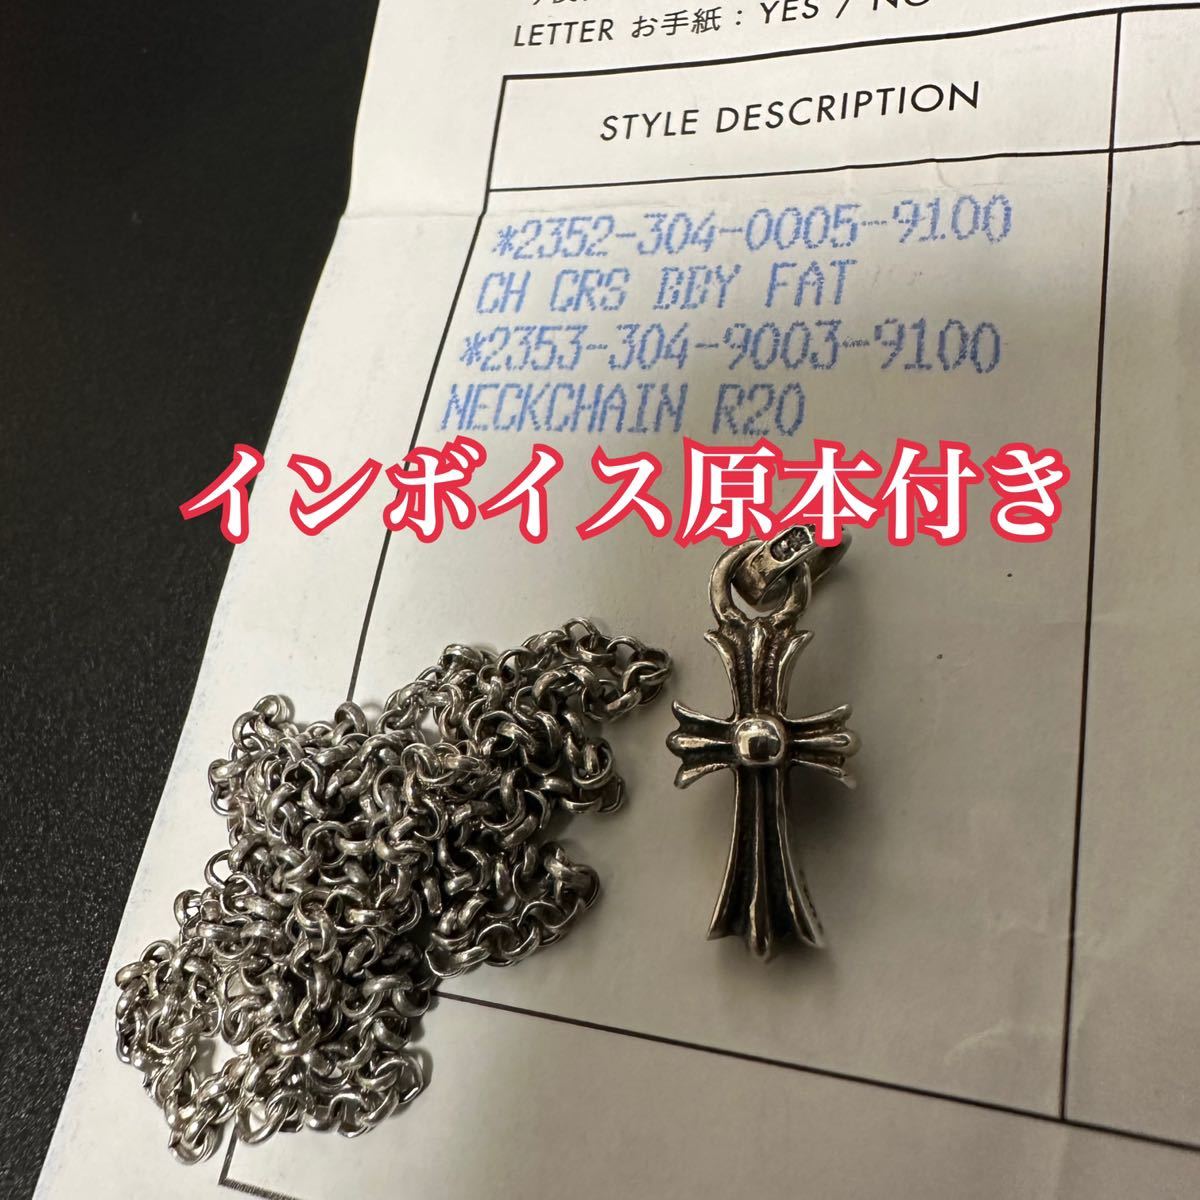 CHROME HEARTS◇CH CRS BBY FAT/2352-304-0005-9100/ペンダントトップ 